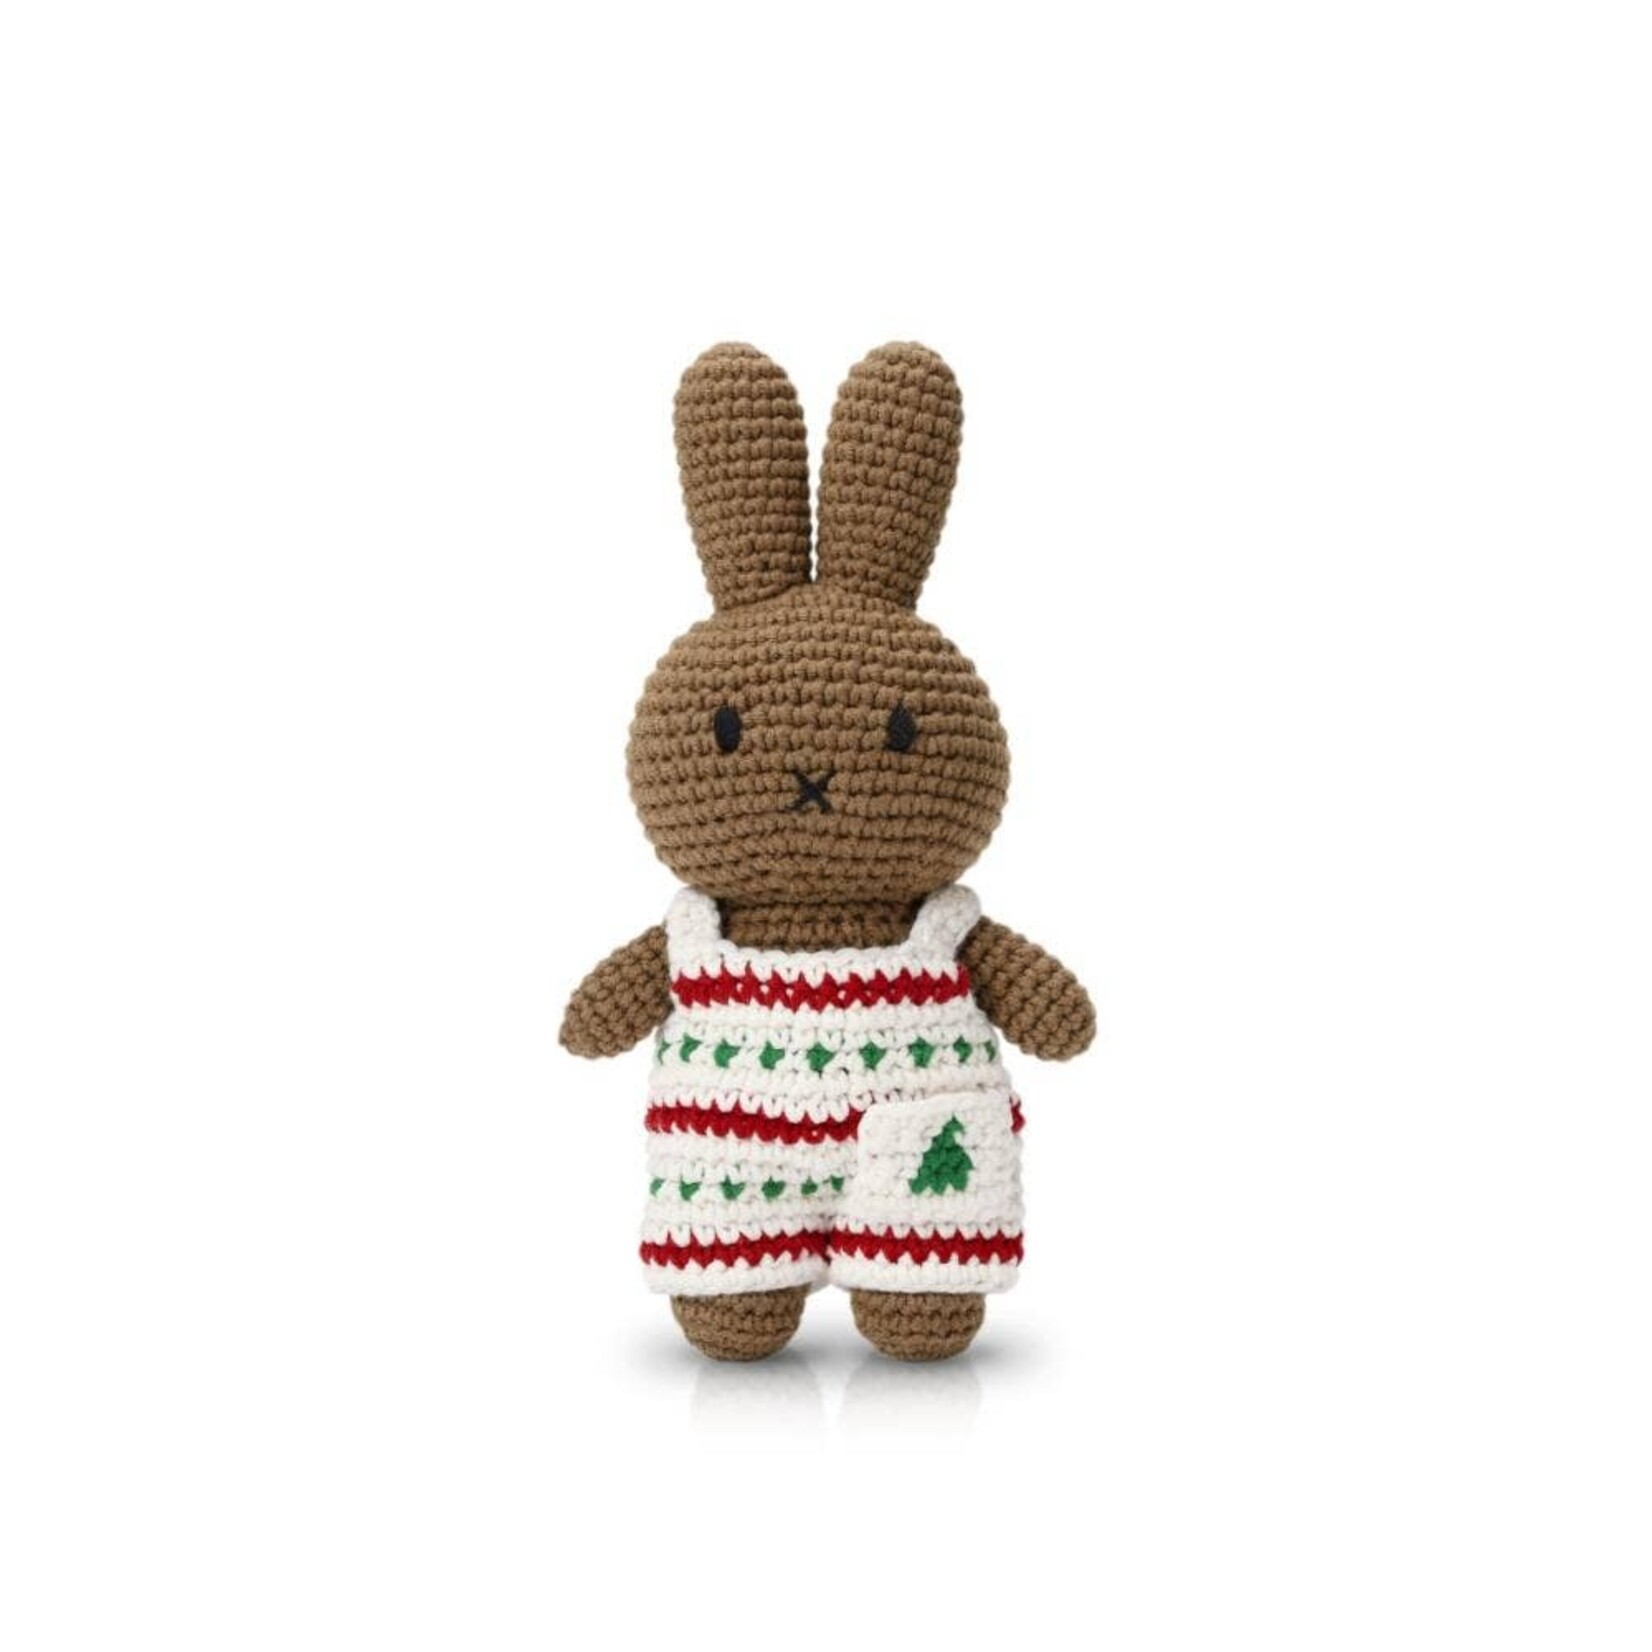 Just Dutch Crocheted Soft Toy - Miffy, Boris, and Melanie - Christmas Outfit